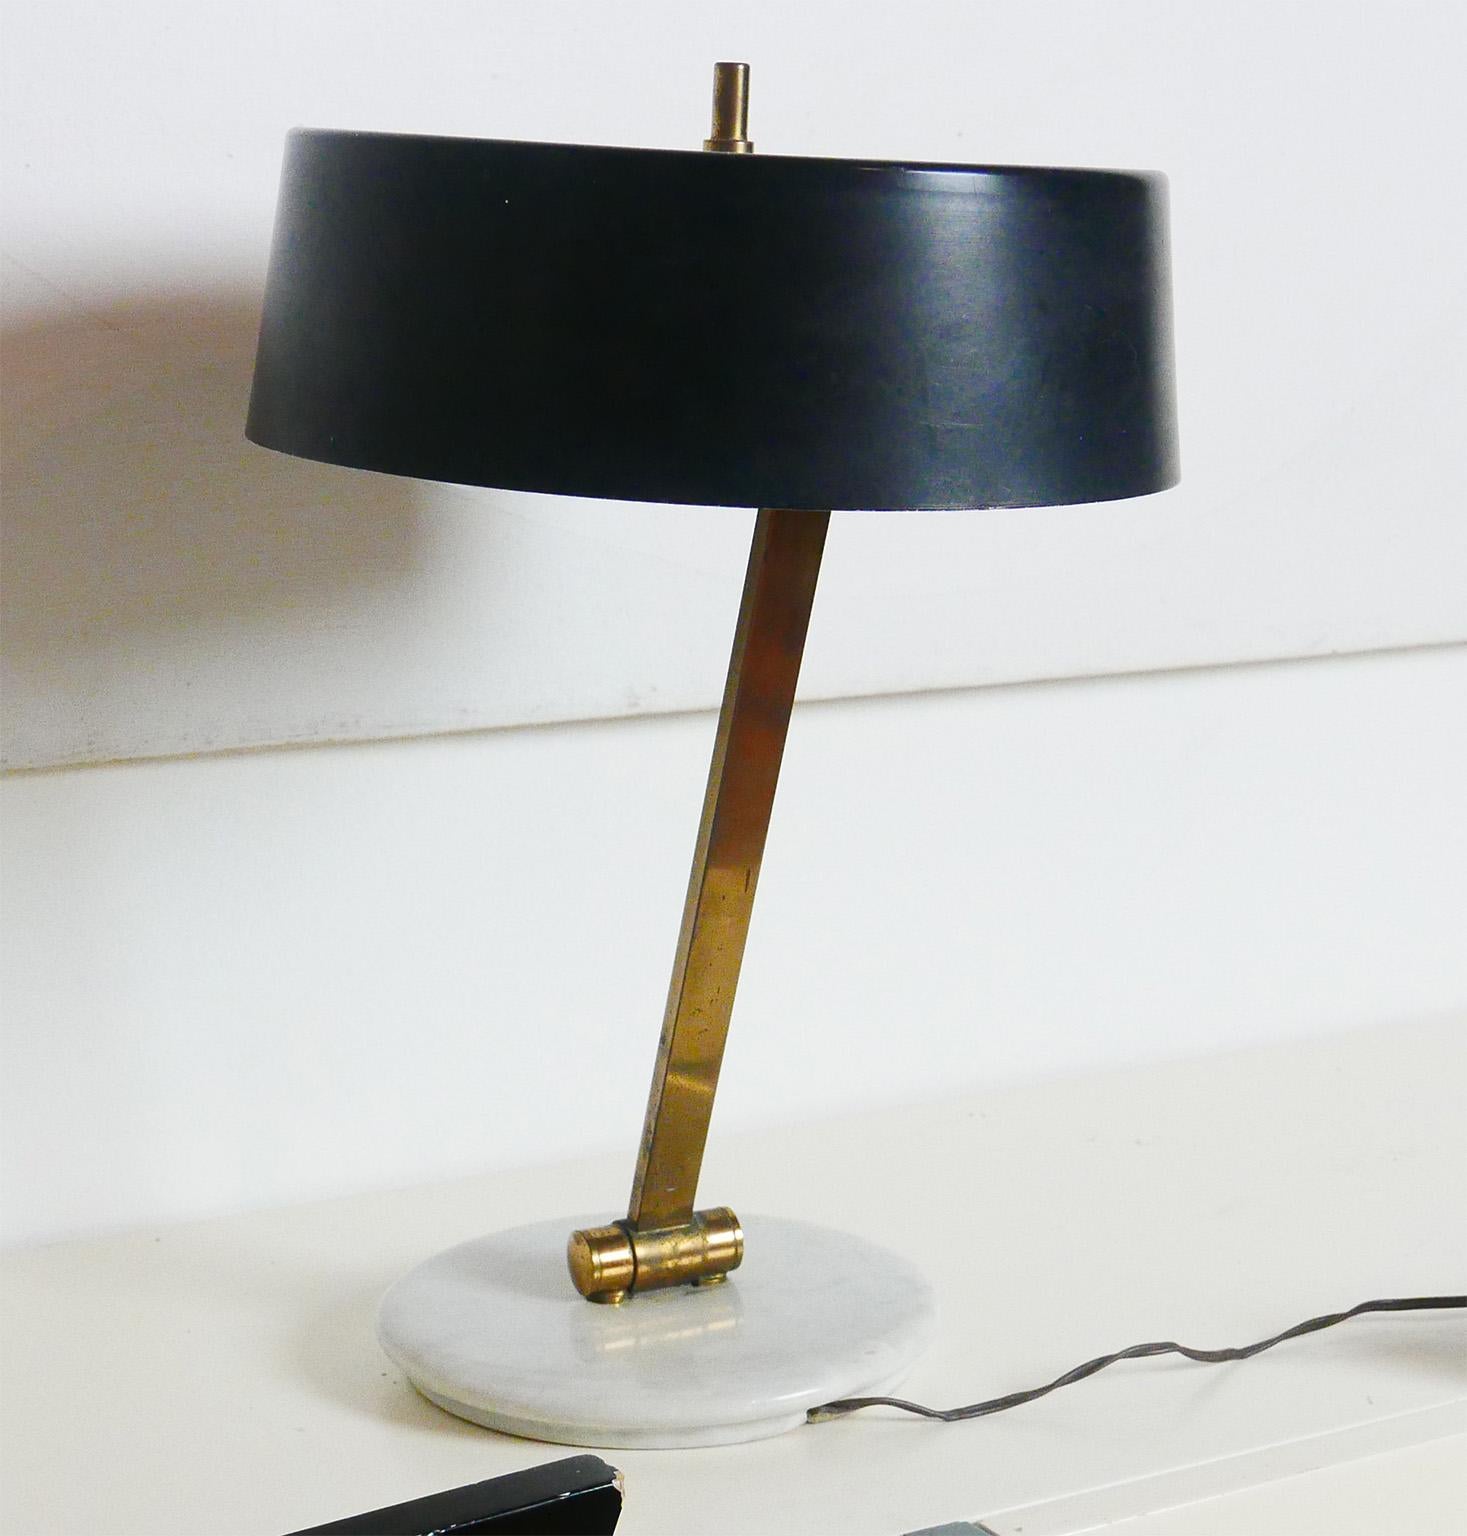 Lacquered Midcentury Italian Arredoluce Black and Brass Adjustable Table Lamp, Italy, 1950